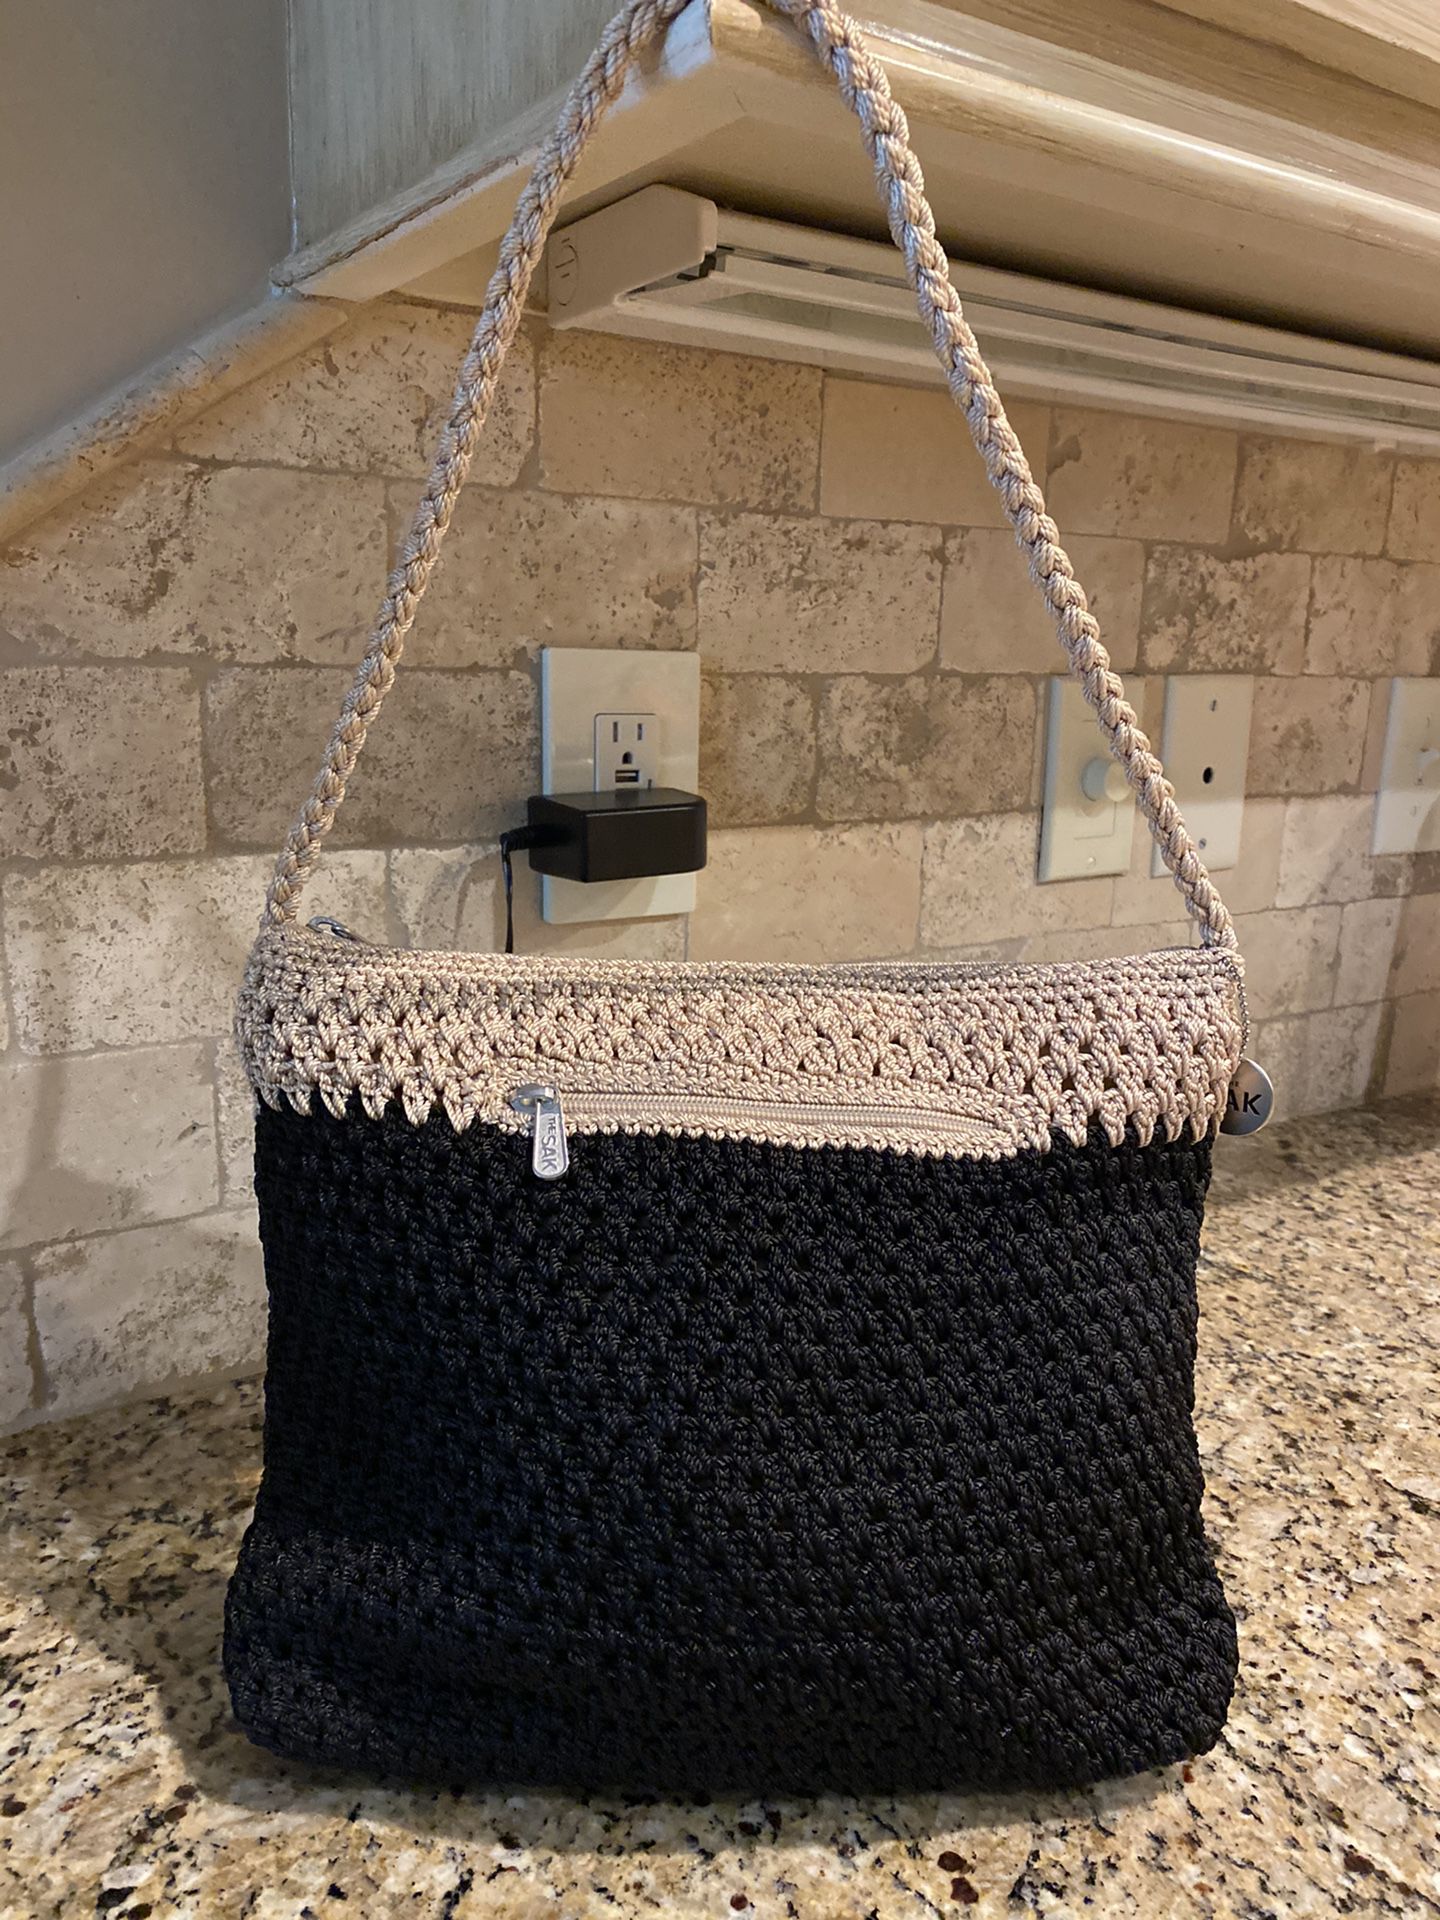 The SAK Purse with zipper closure. Has zipper pocket inside and outside (9 1/2” L x 12” W). The strap is 11” from zipper closure. Black & Taupe